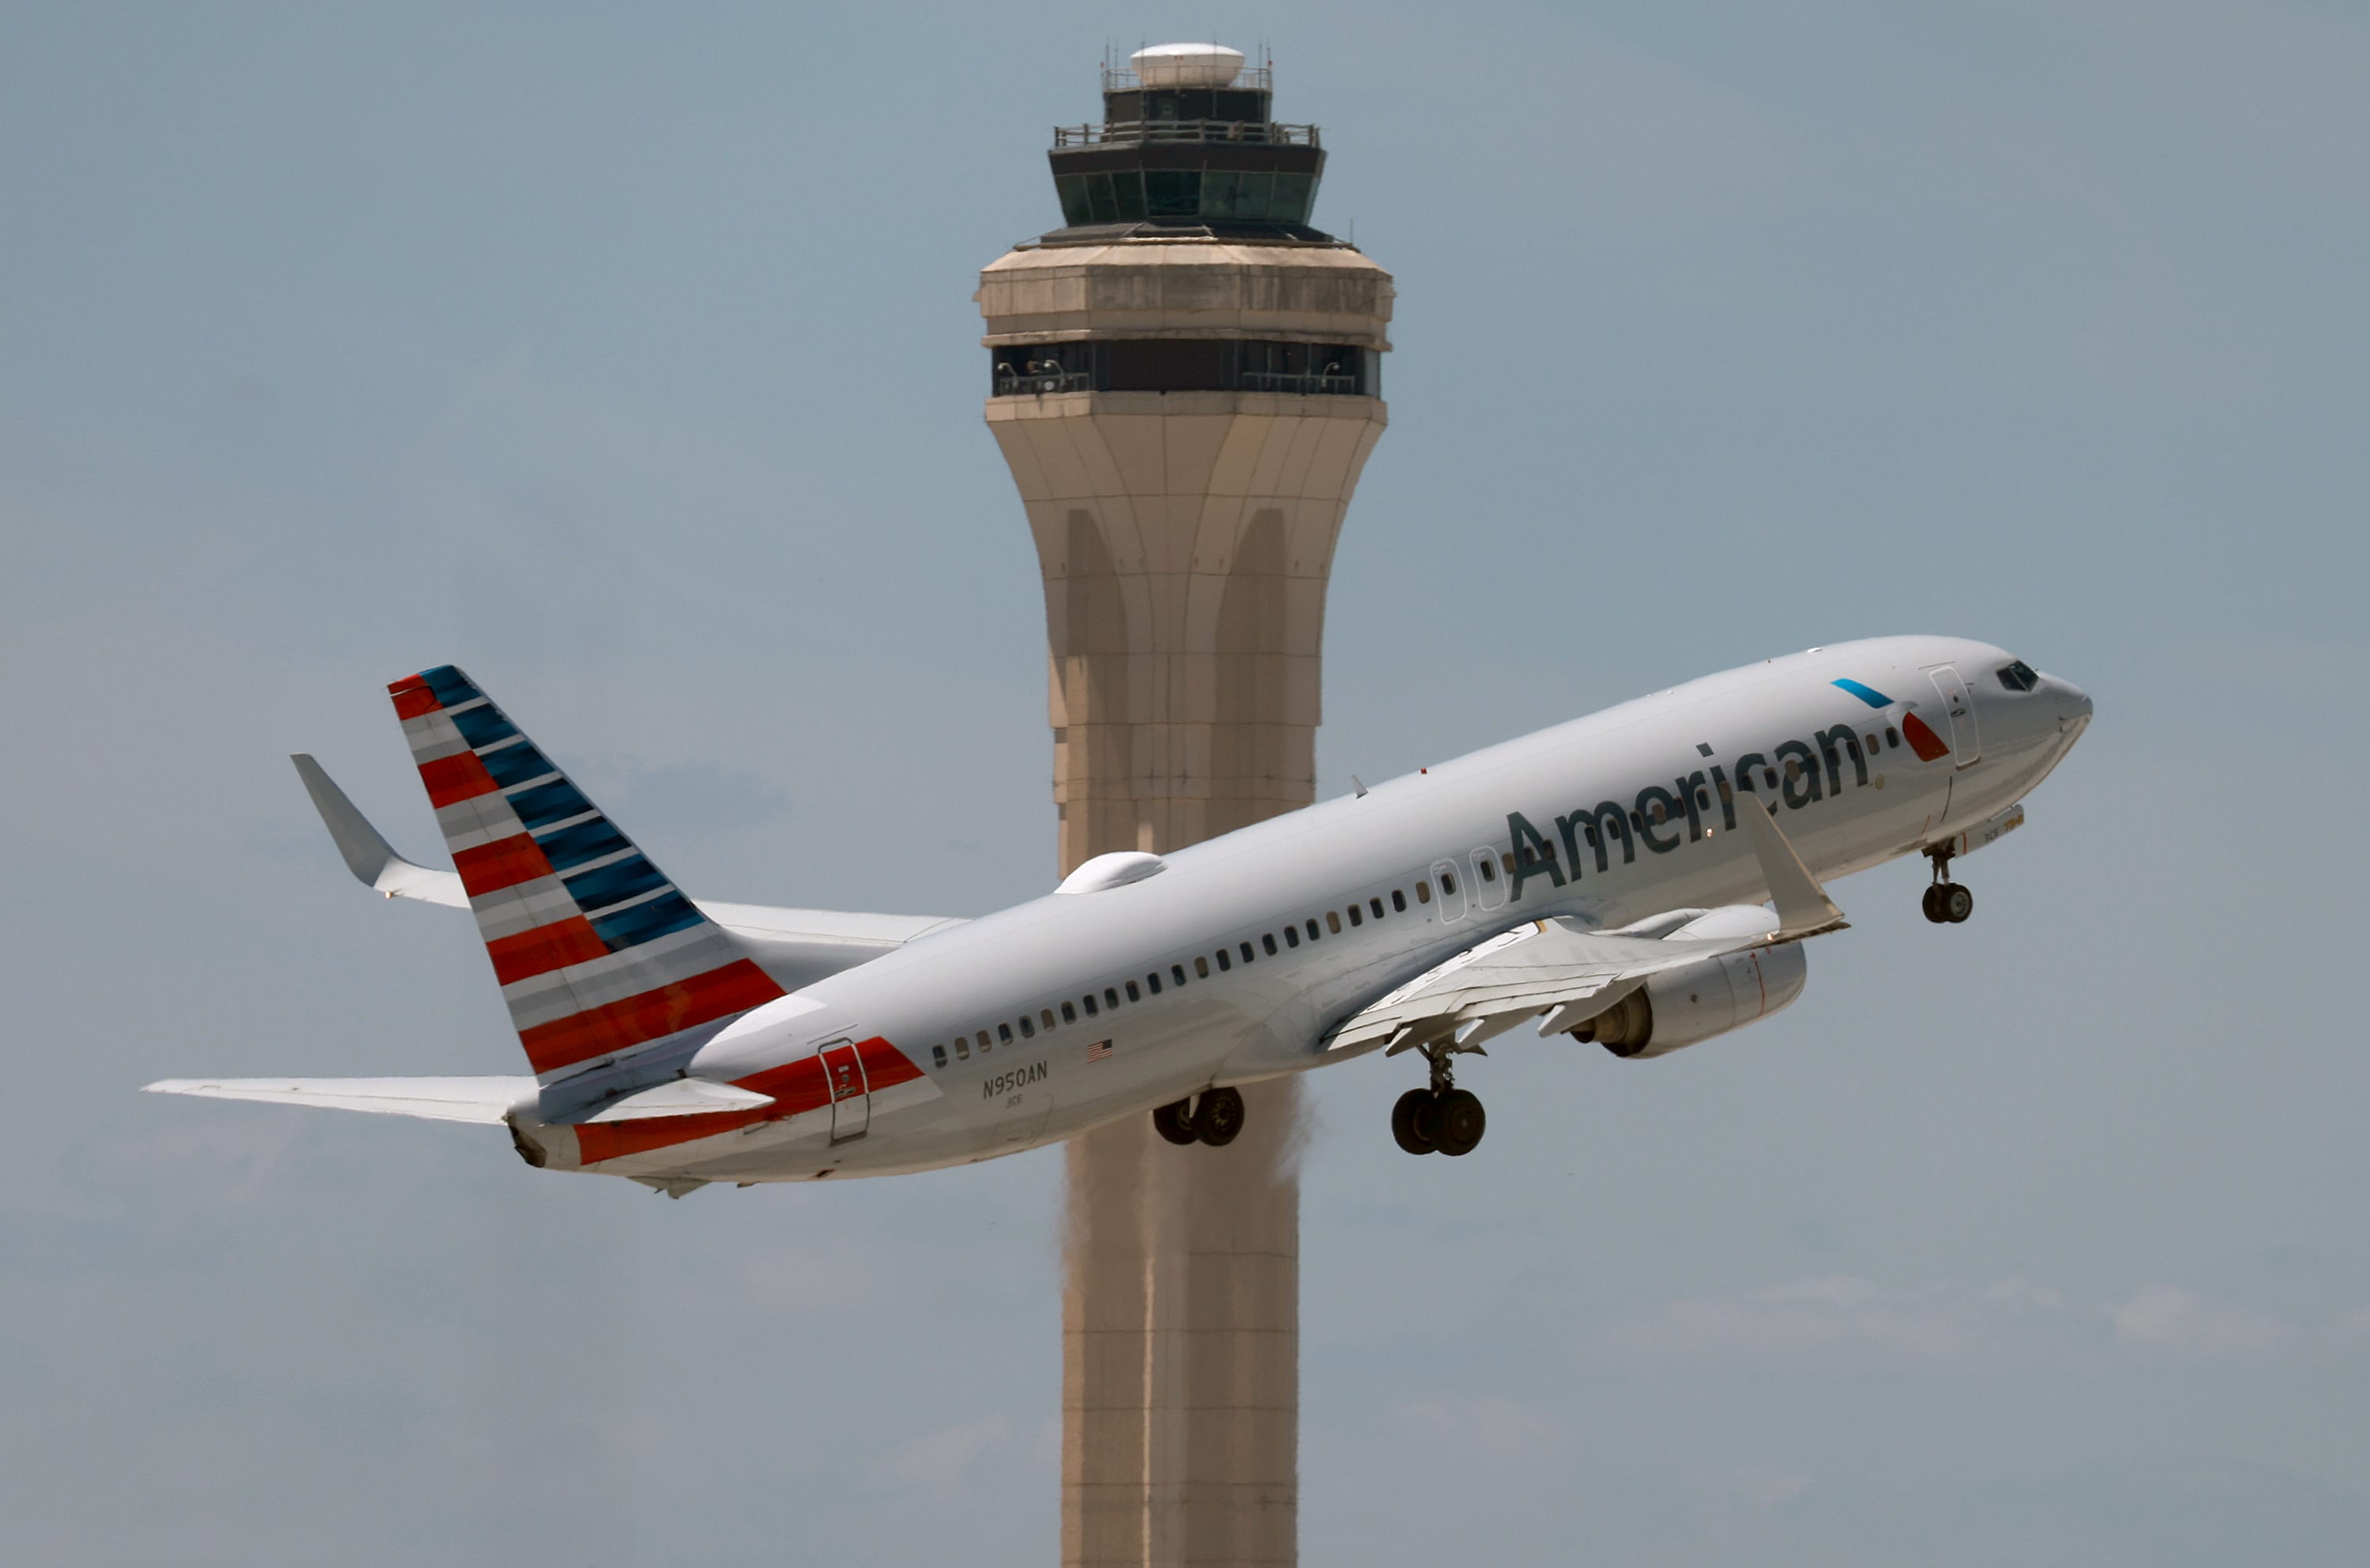 American Airlines pilots agree to a high-paying job deal